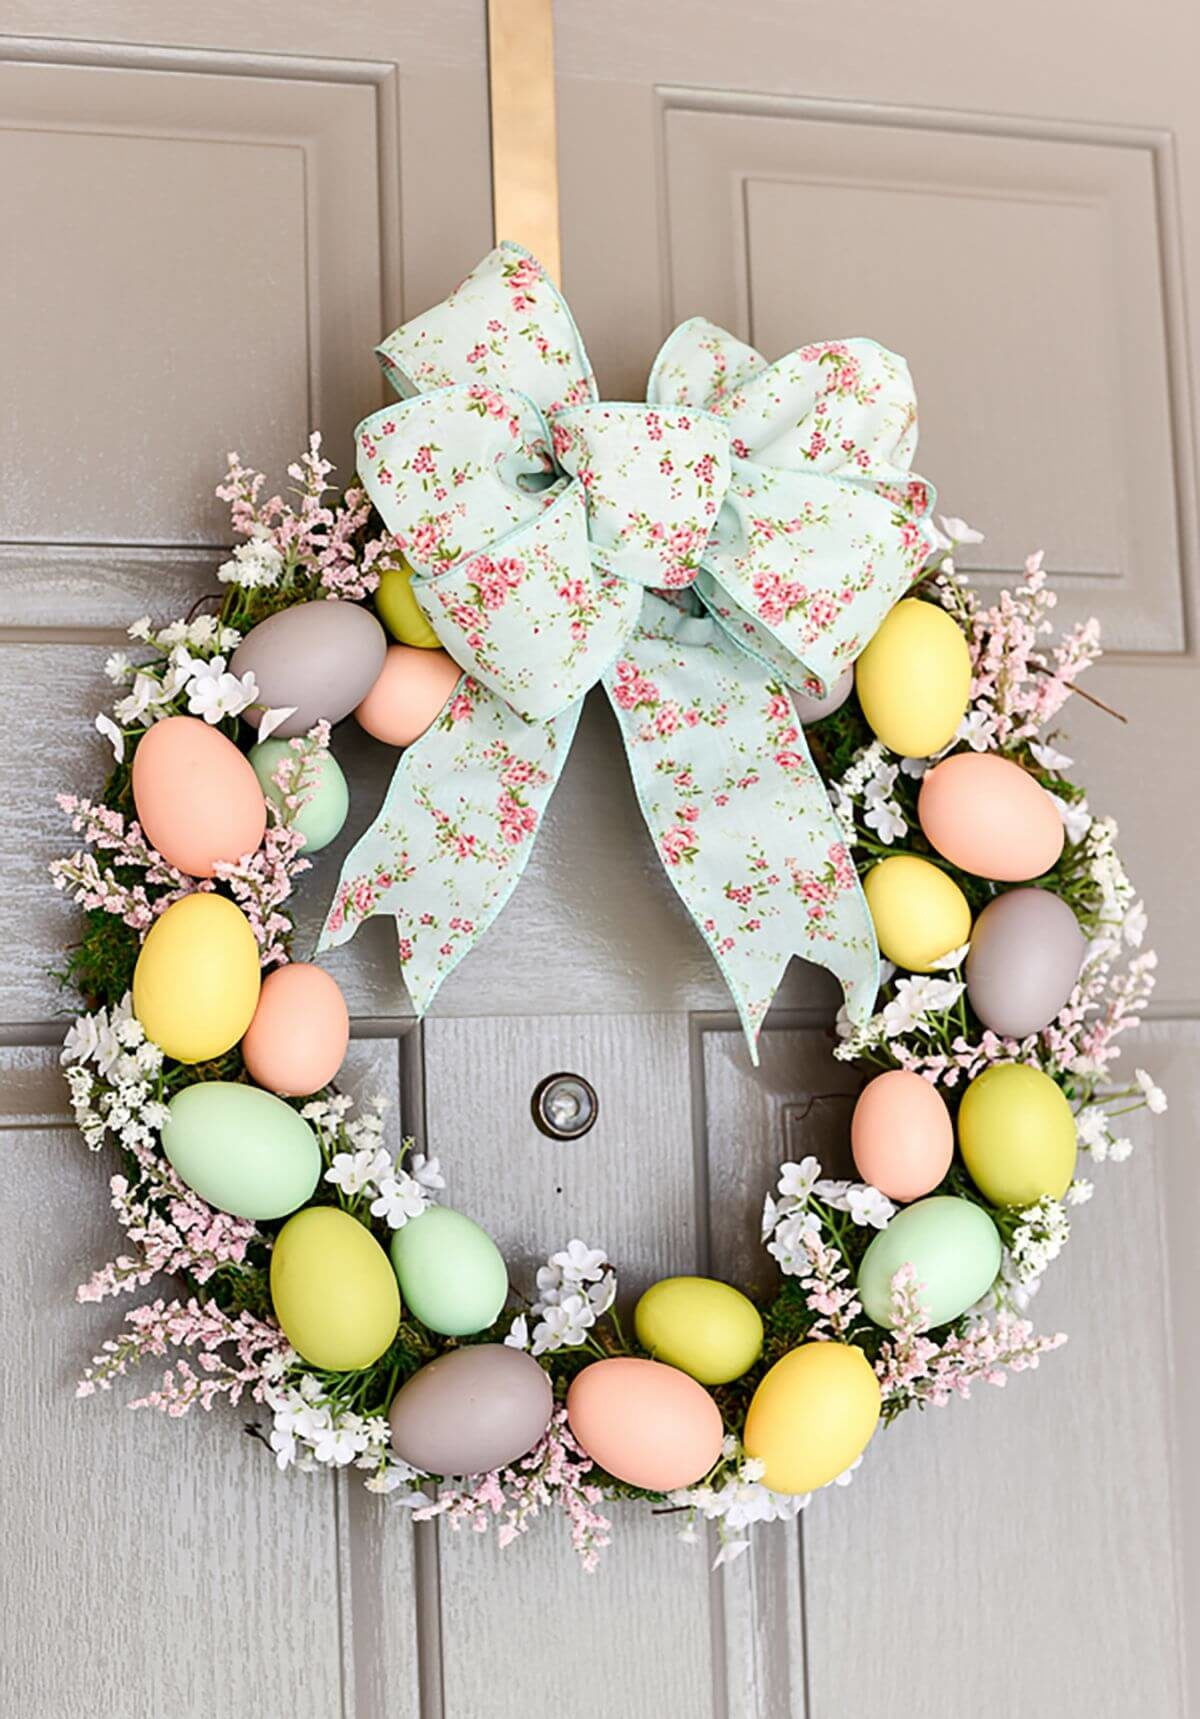 Easter Outdoor Decorating Ideas
 18 Outdoor Easter Decorations Ideas Taken From Pinterest